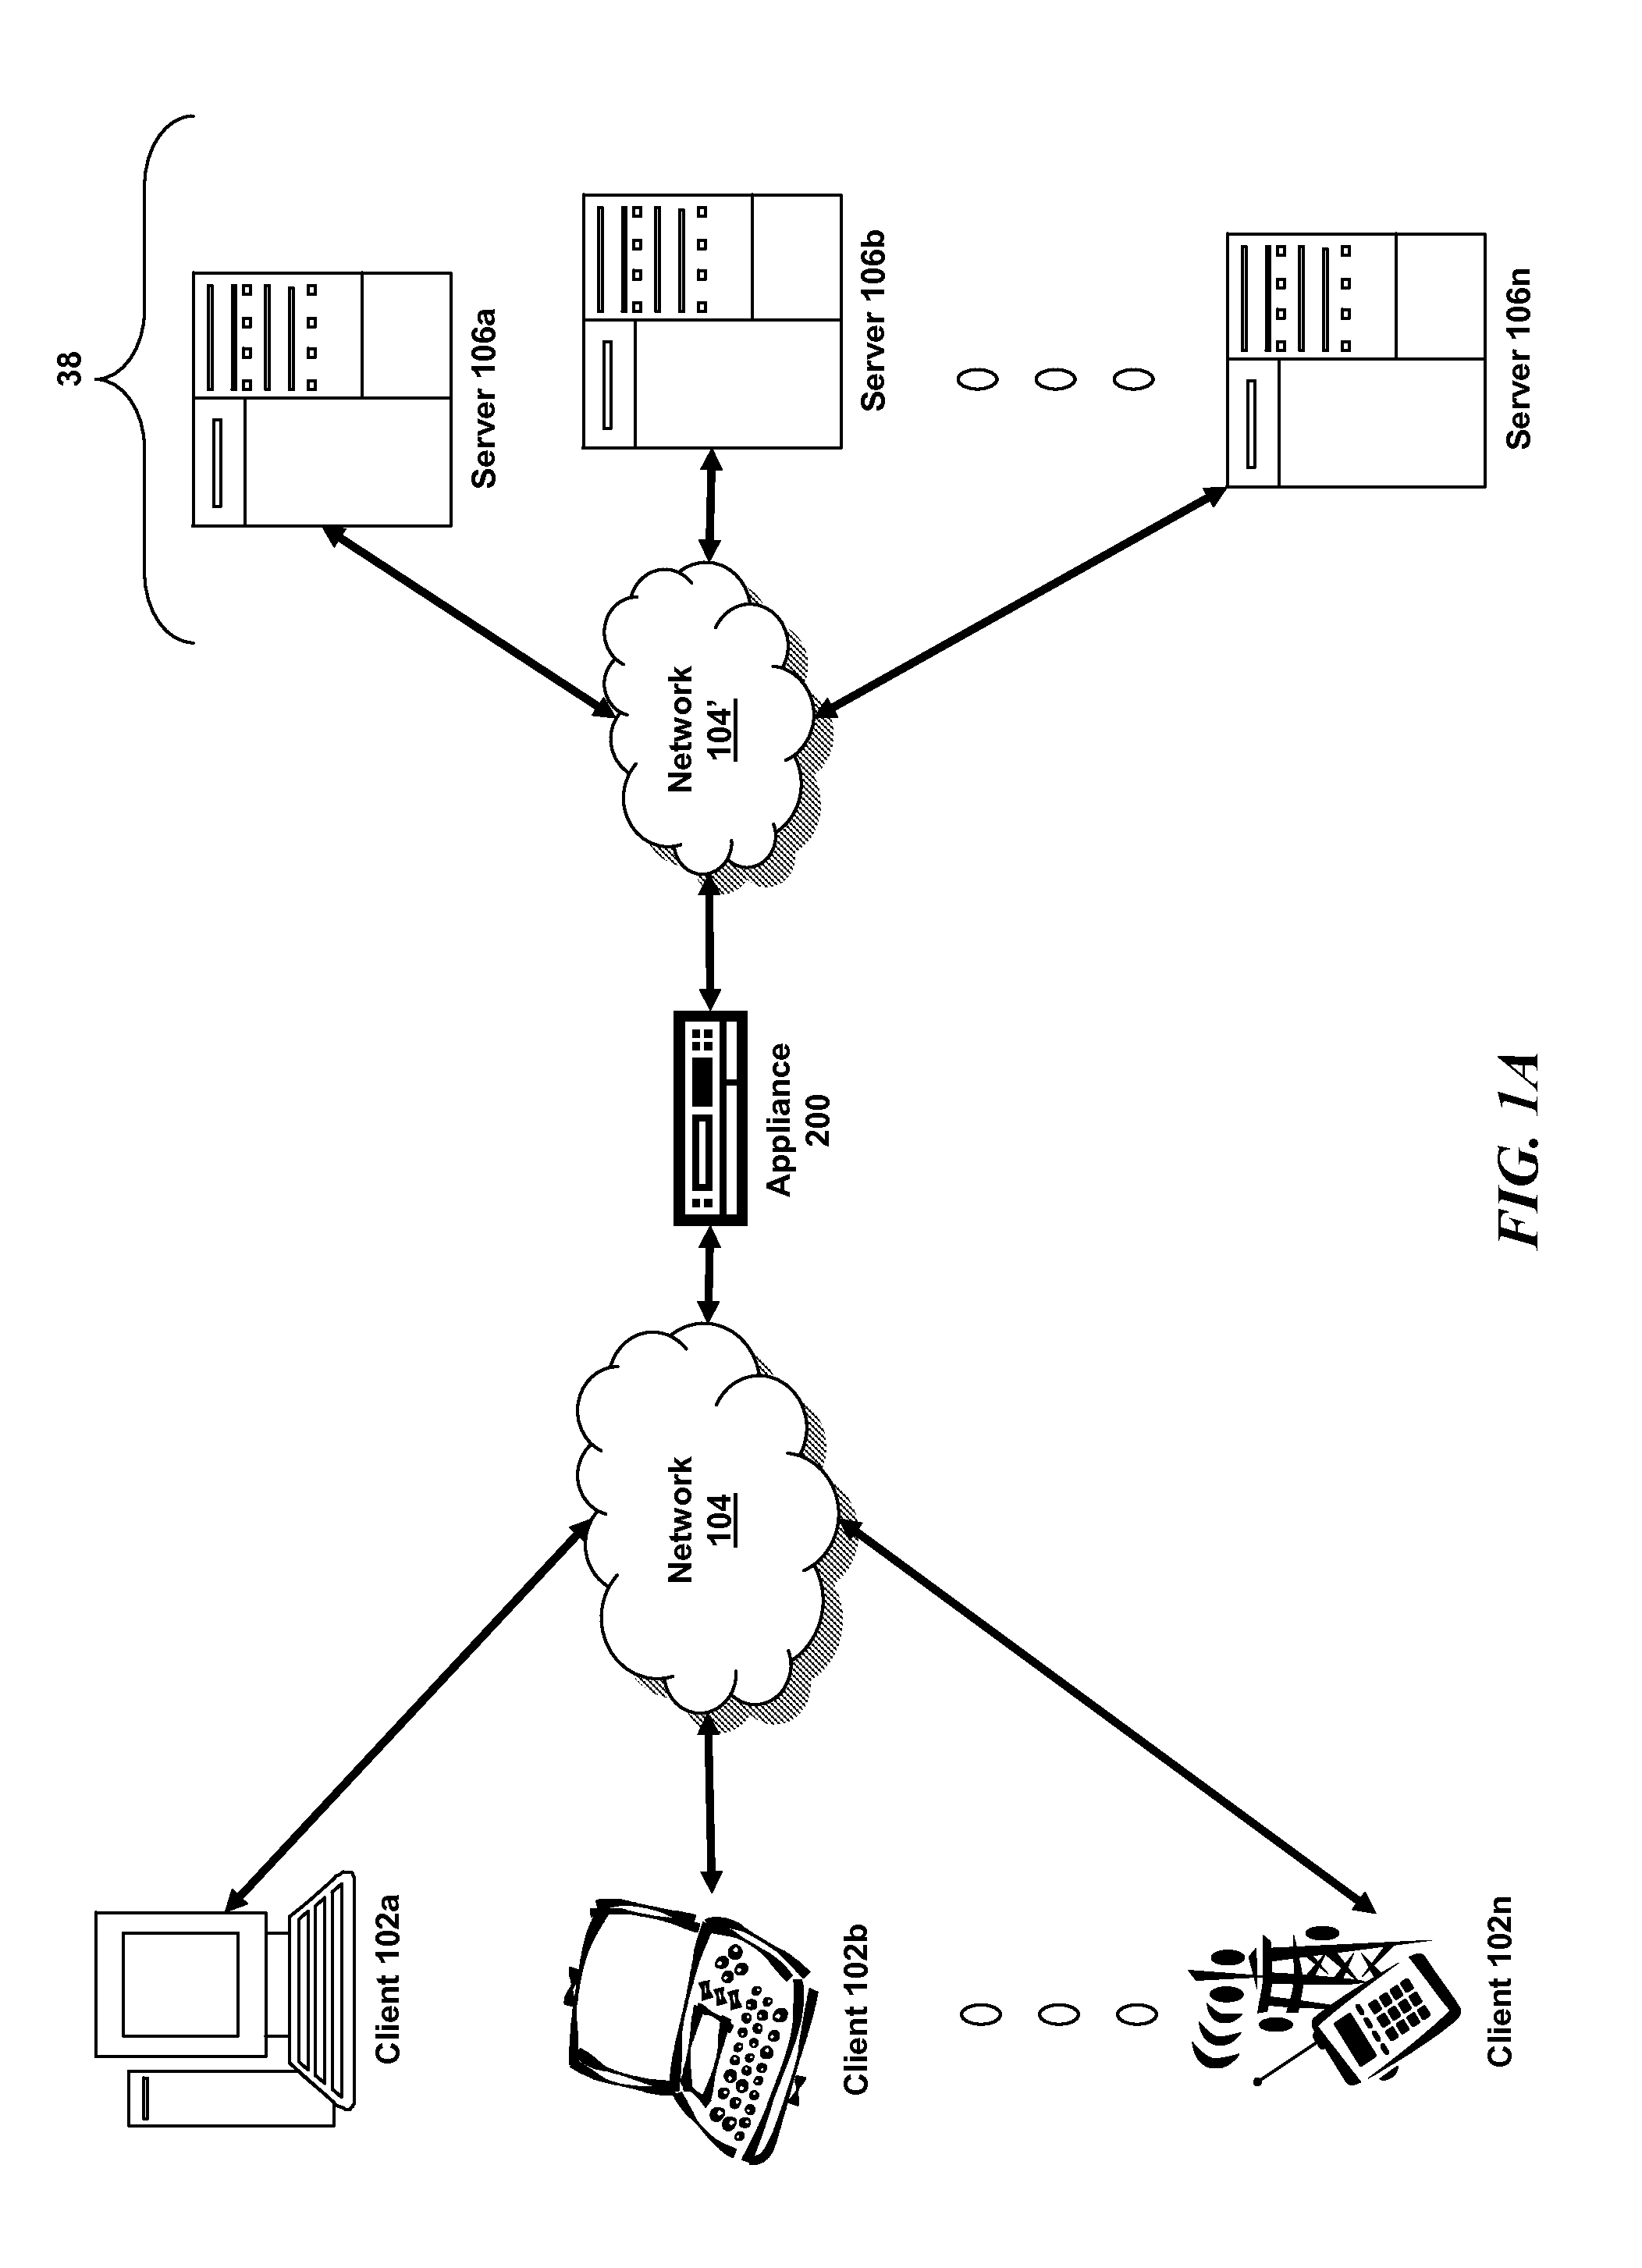 Systems and methods for iip address sharing across cores in a multi-core system